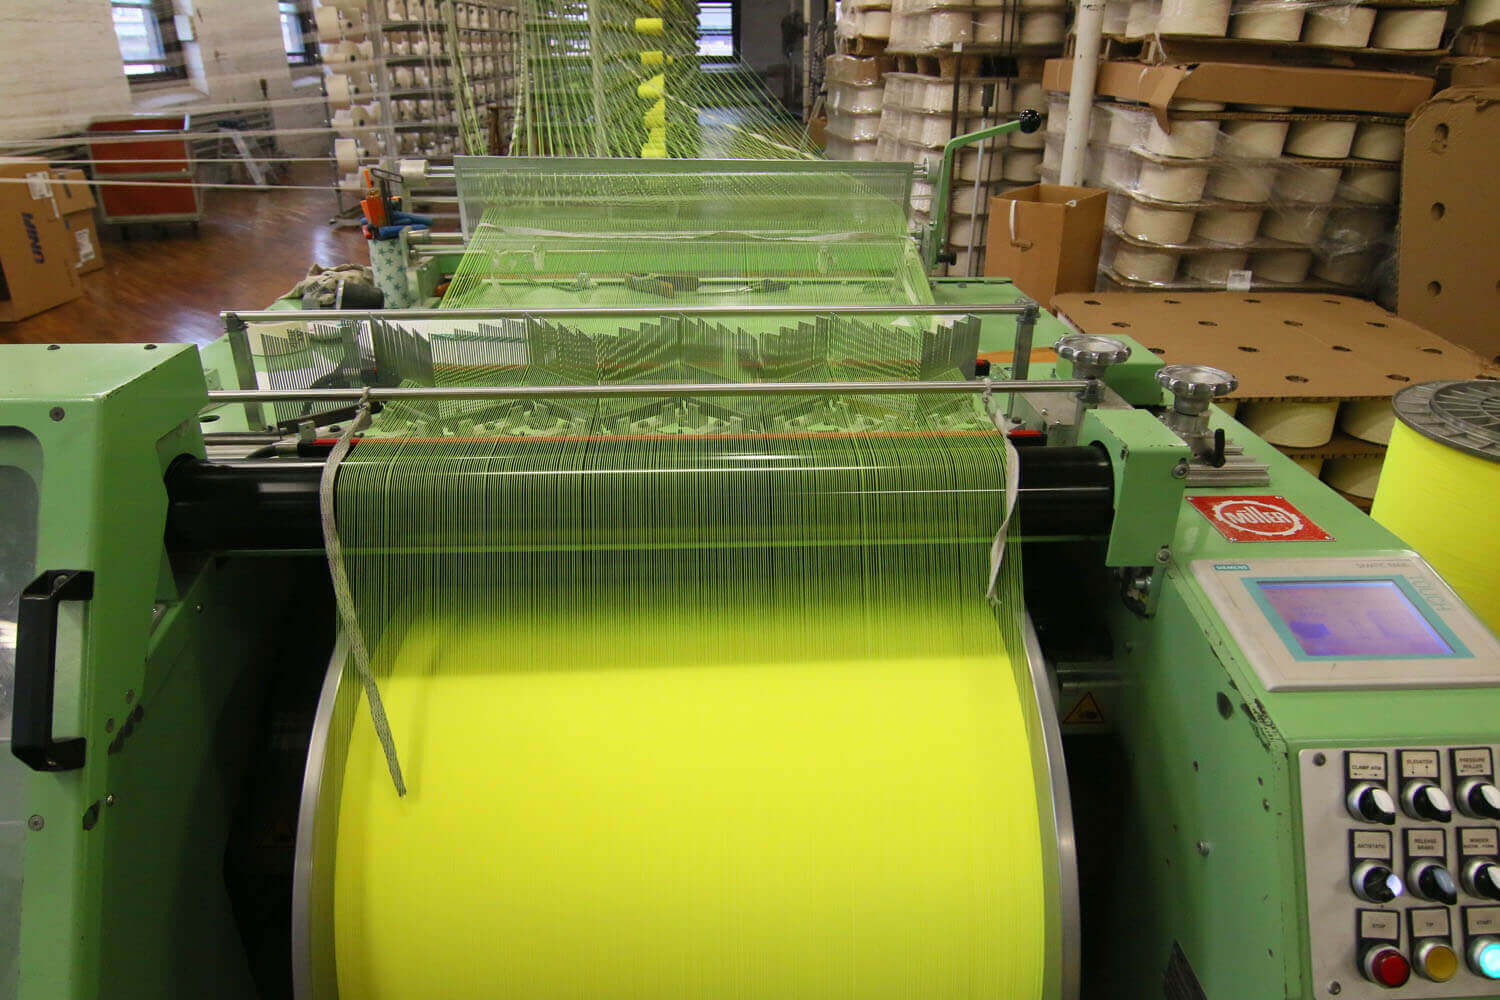 Strands of yellow fabric being rolled together at the end of the textile manufacturing process